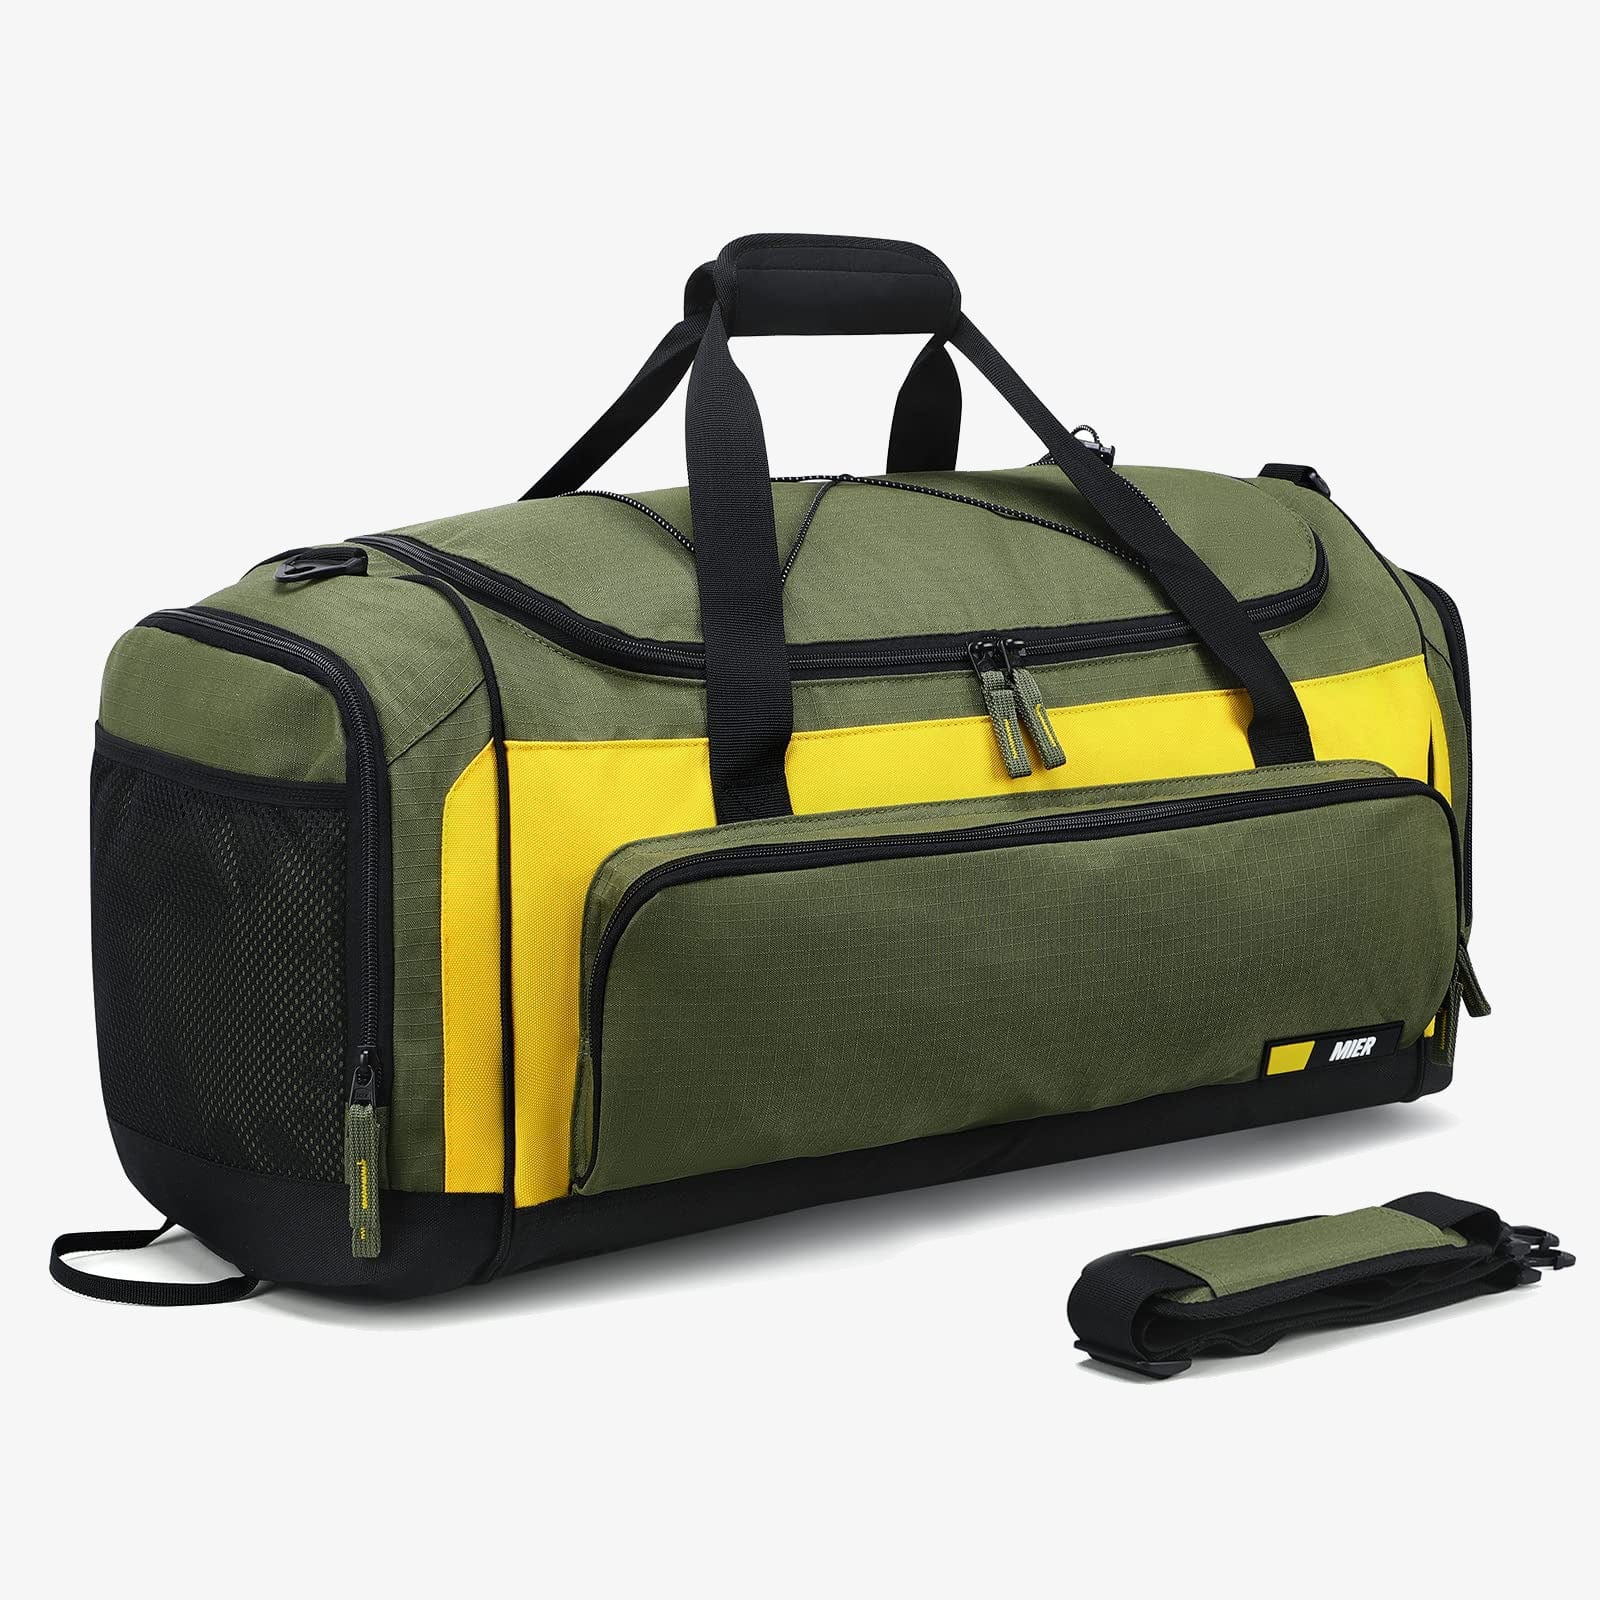 Large Sports Gym Bag Duffel Bag with Shoe Compartment - Green